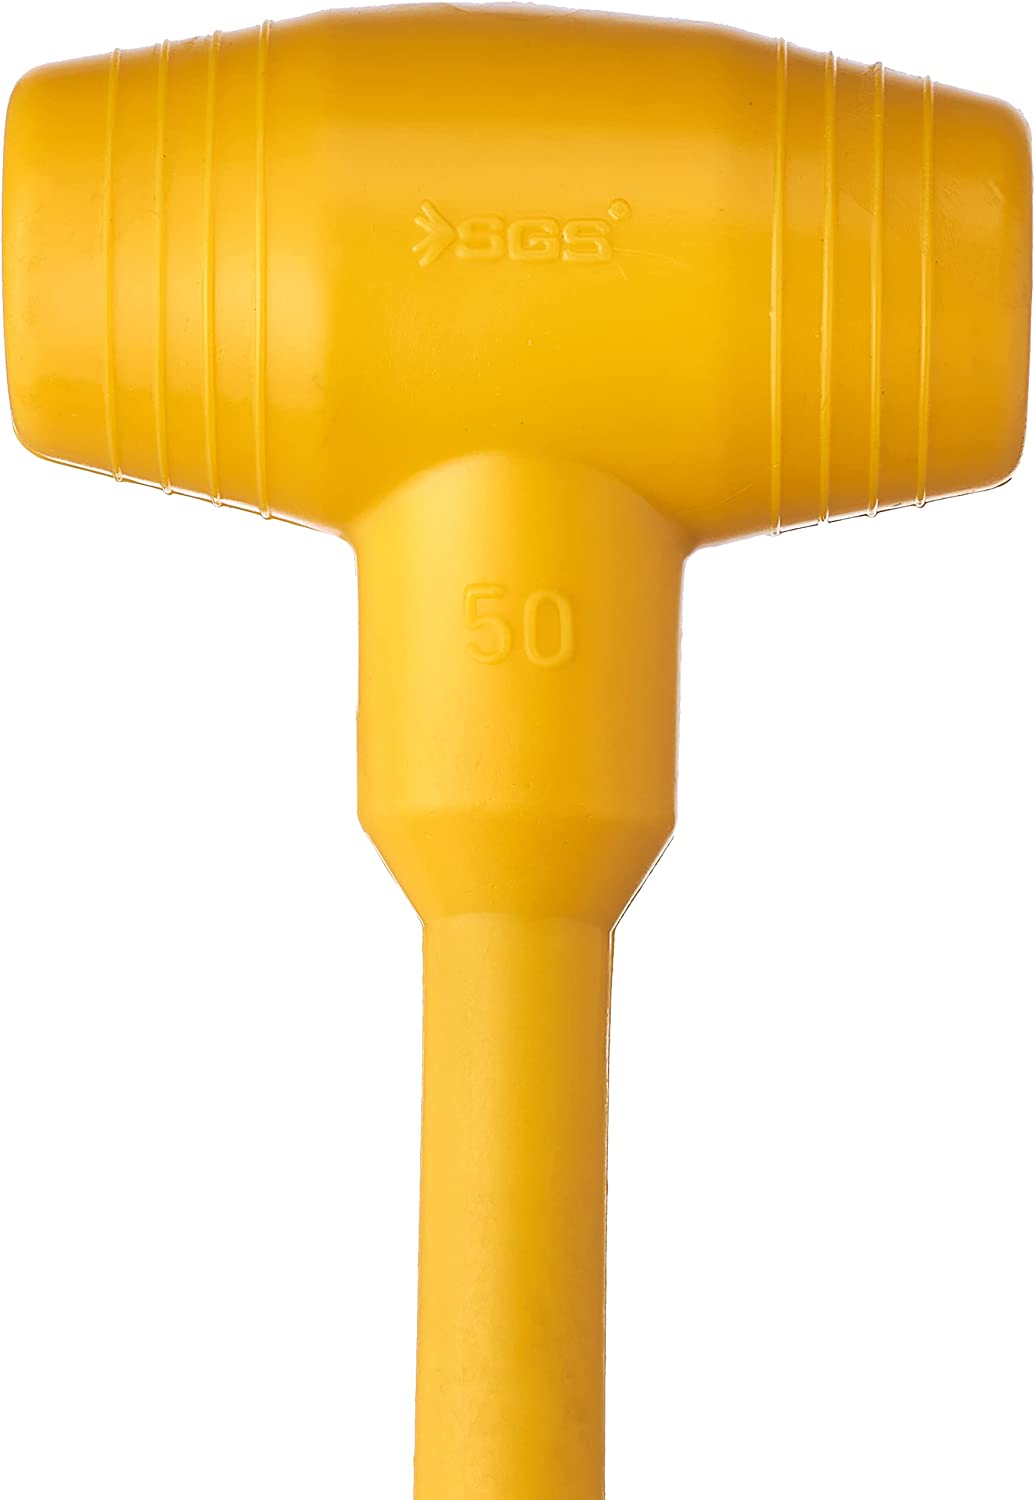 SGS Professional Plastic Hammer 60g - SGS110 | Supply Master | Accra, Ghana Hammers Mallets & Sledges Buy Tools hardware Building materials